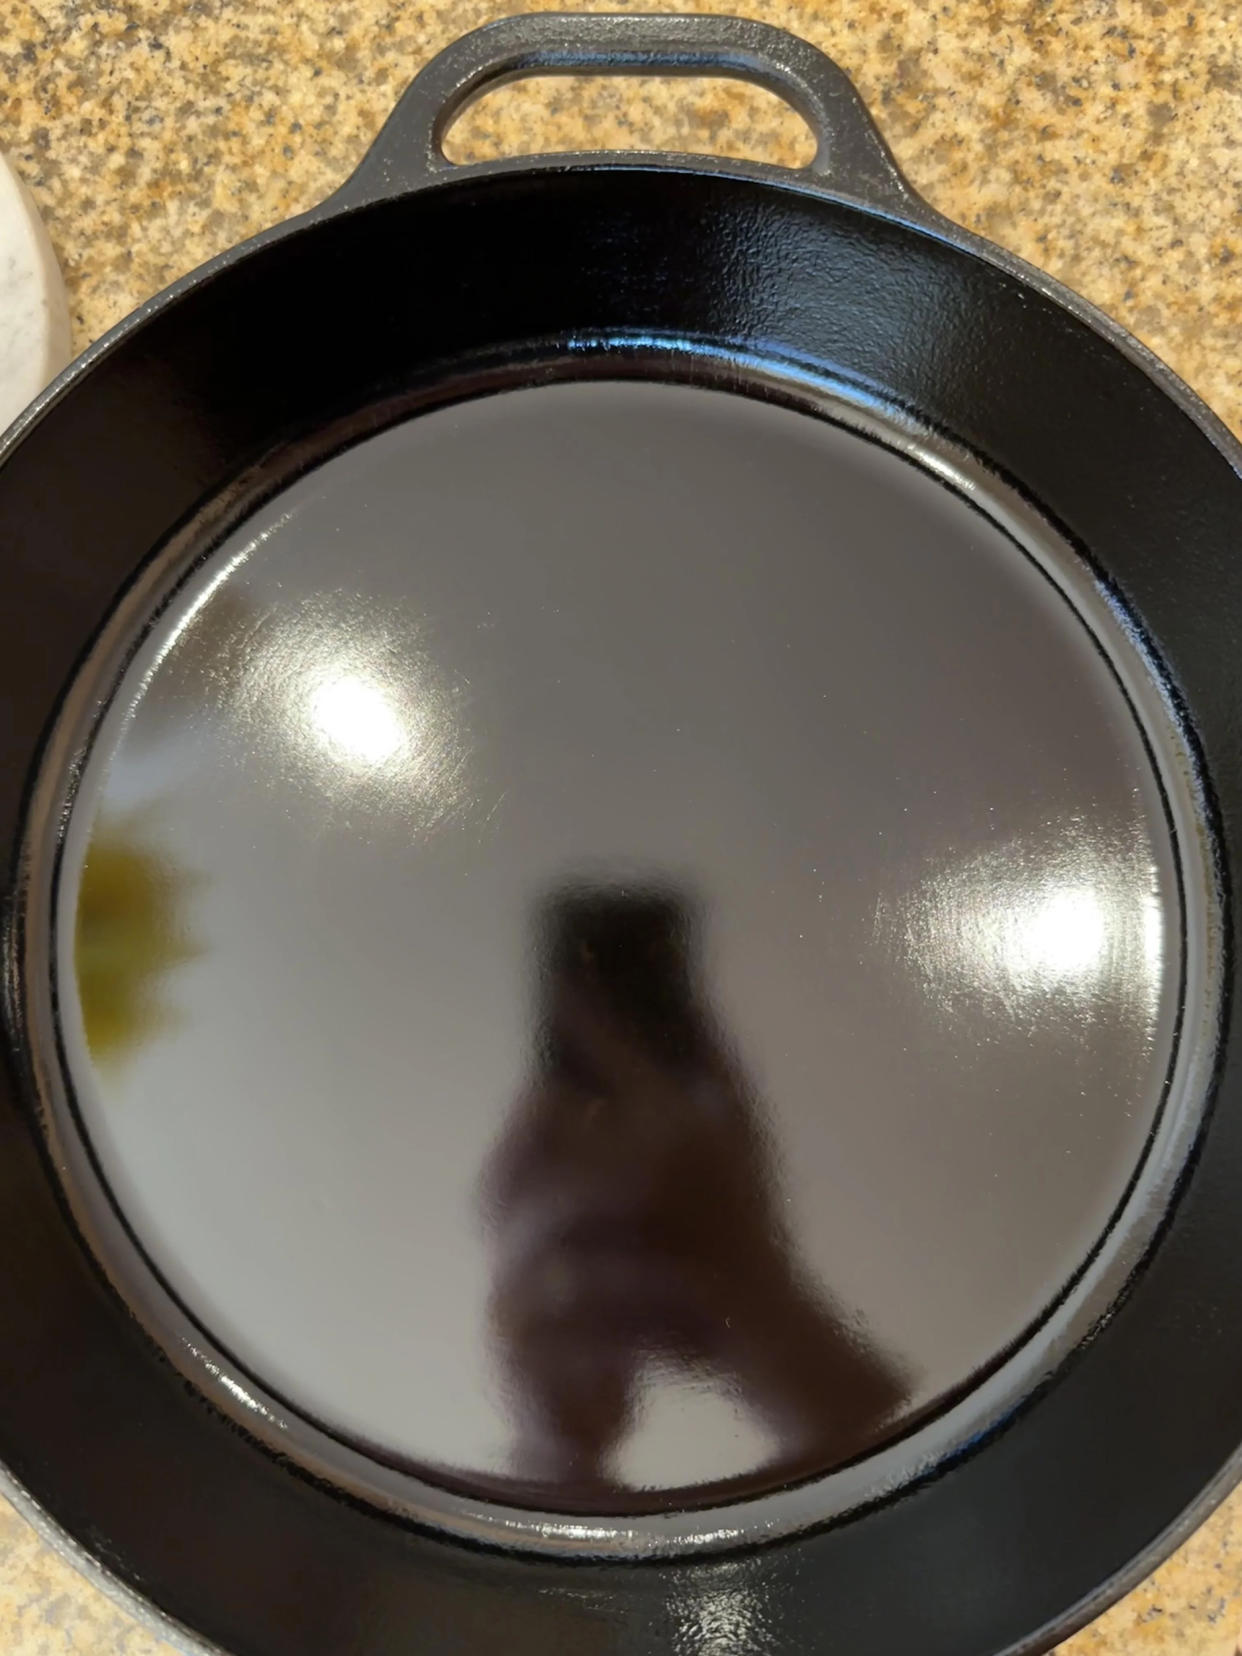 Dewey's cast-iron skillet with 80 coats of seasoning and his phone in the reflection. (Courtesy u/fatmummy222 via Reddit)